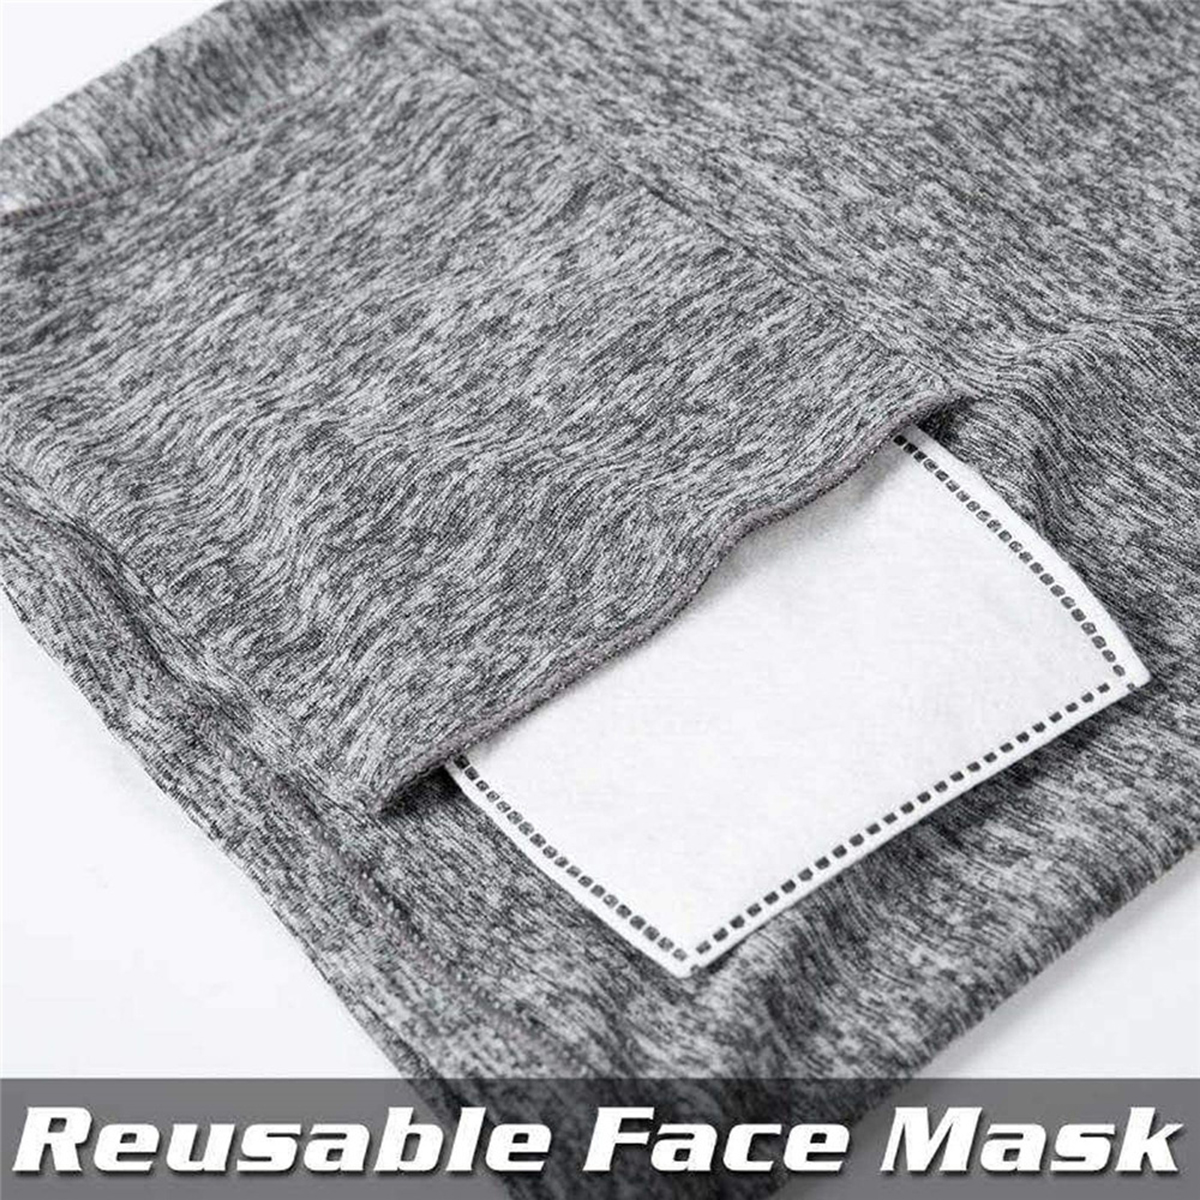 Outdoor-Dustproof-Breathable-Sport-Head-Scarves-Face-Mask-With-5-Filter-Pads-Windproof-PM25-Sunscree-1683314-4